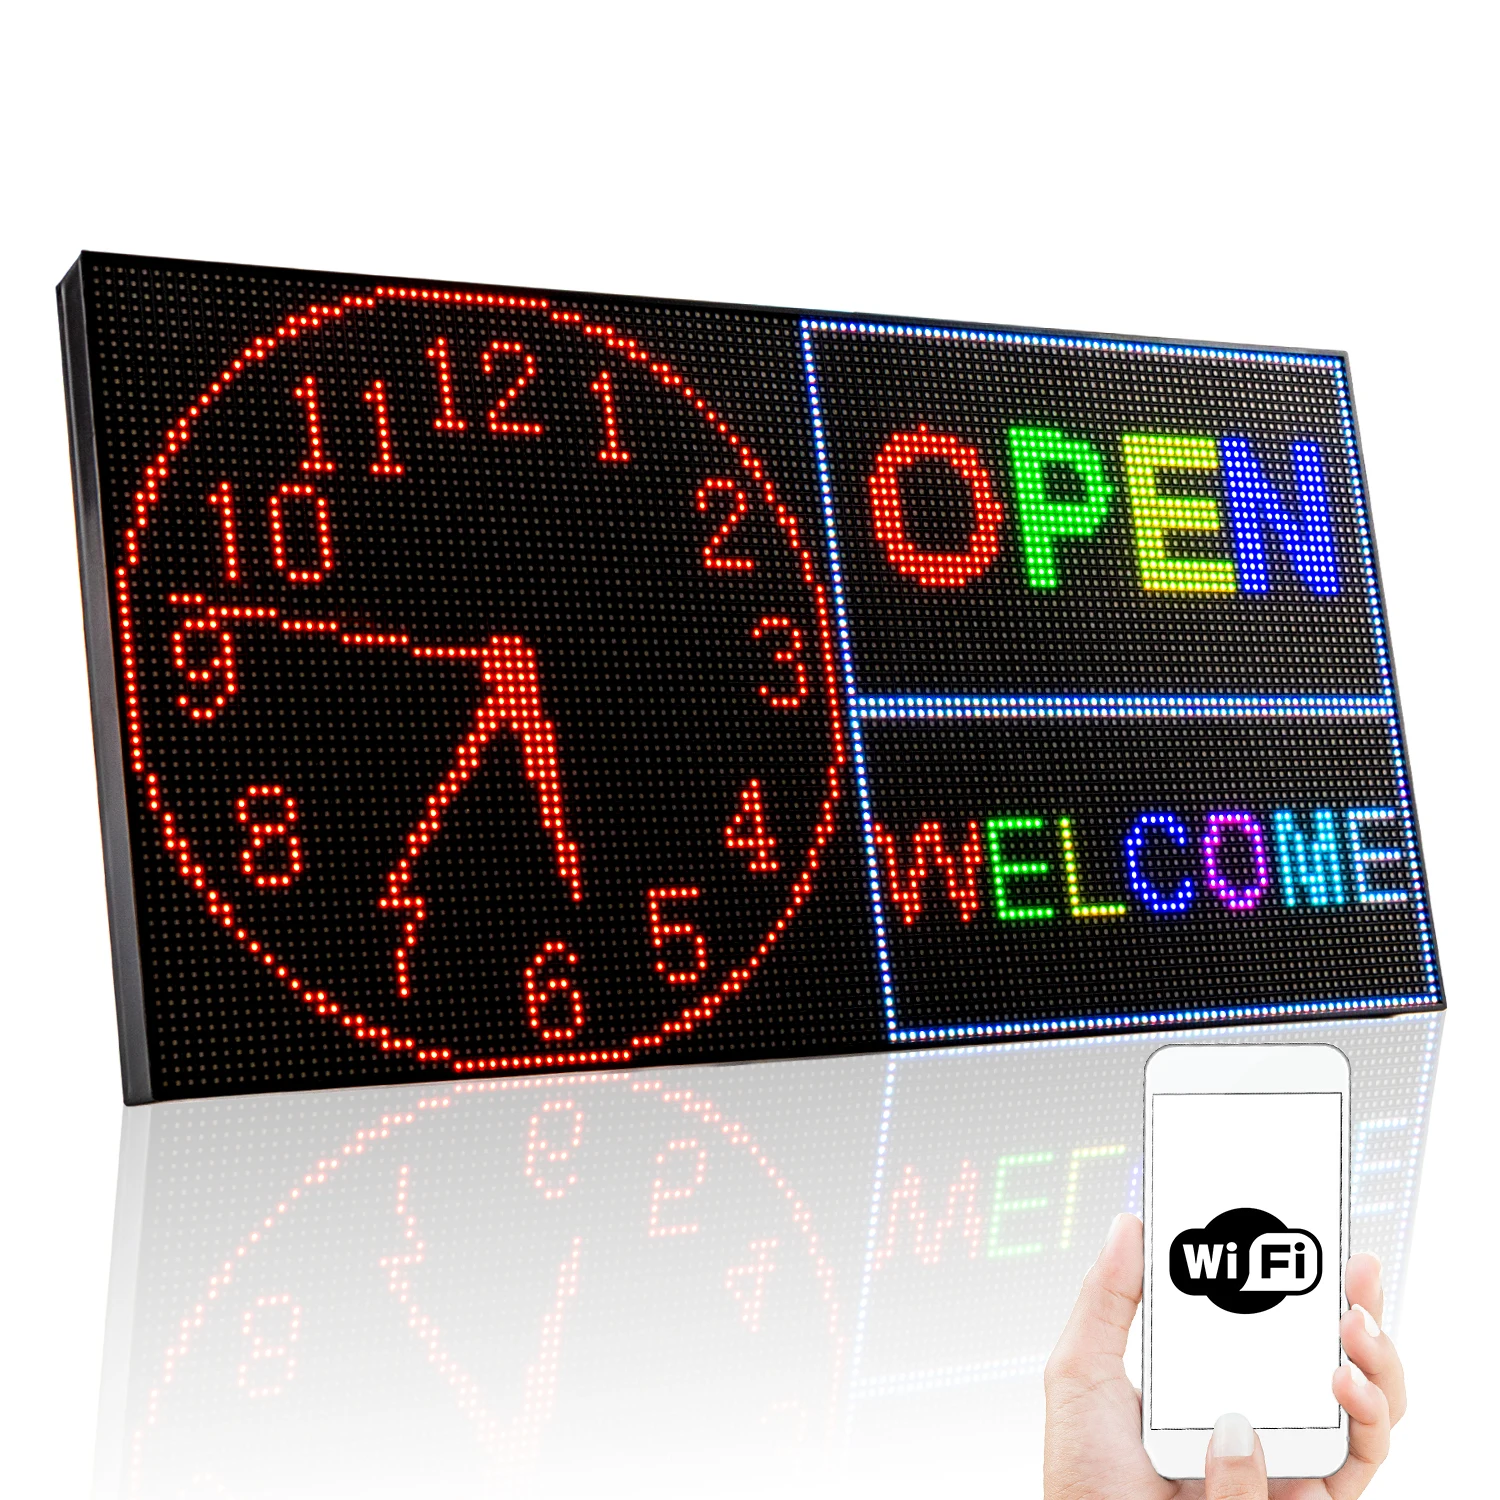 39CM P3 5V Led Display Panel RGB WiFi Programmable Scrolling Message Board Matrix Open Sign with Foldable Stand for Desktop Desk